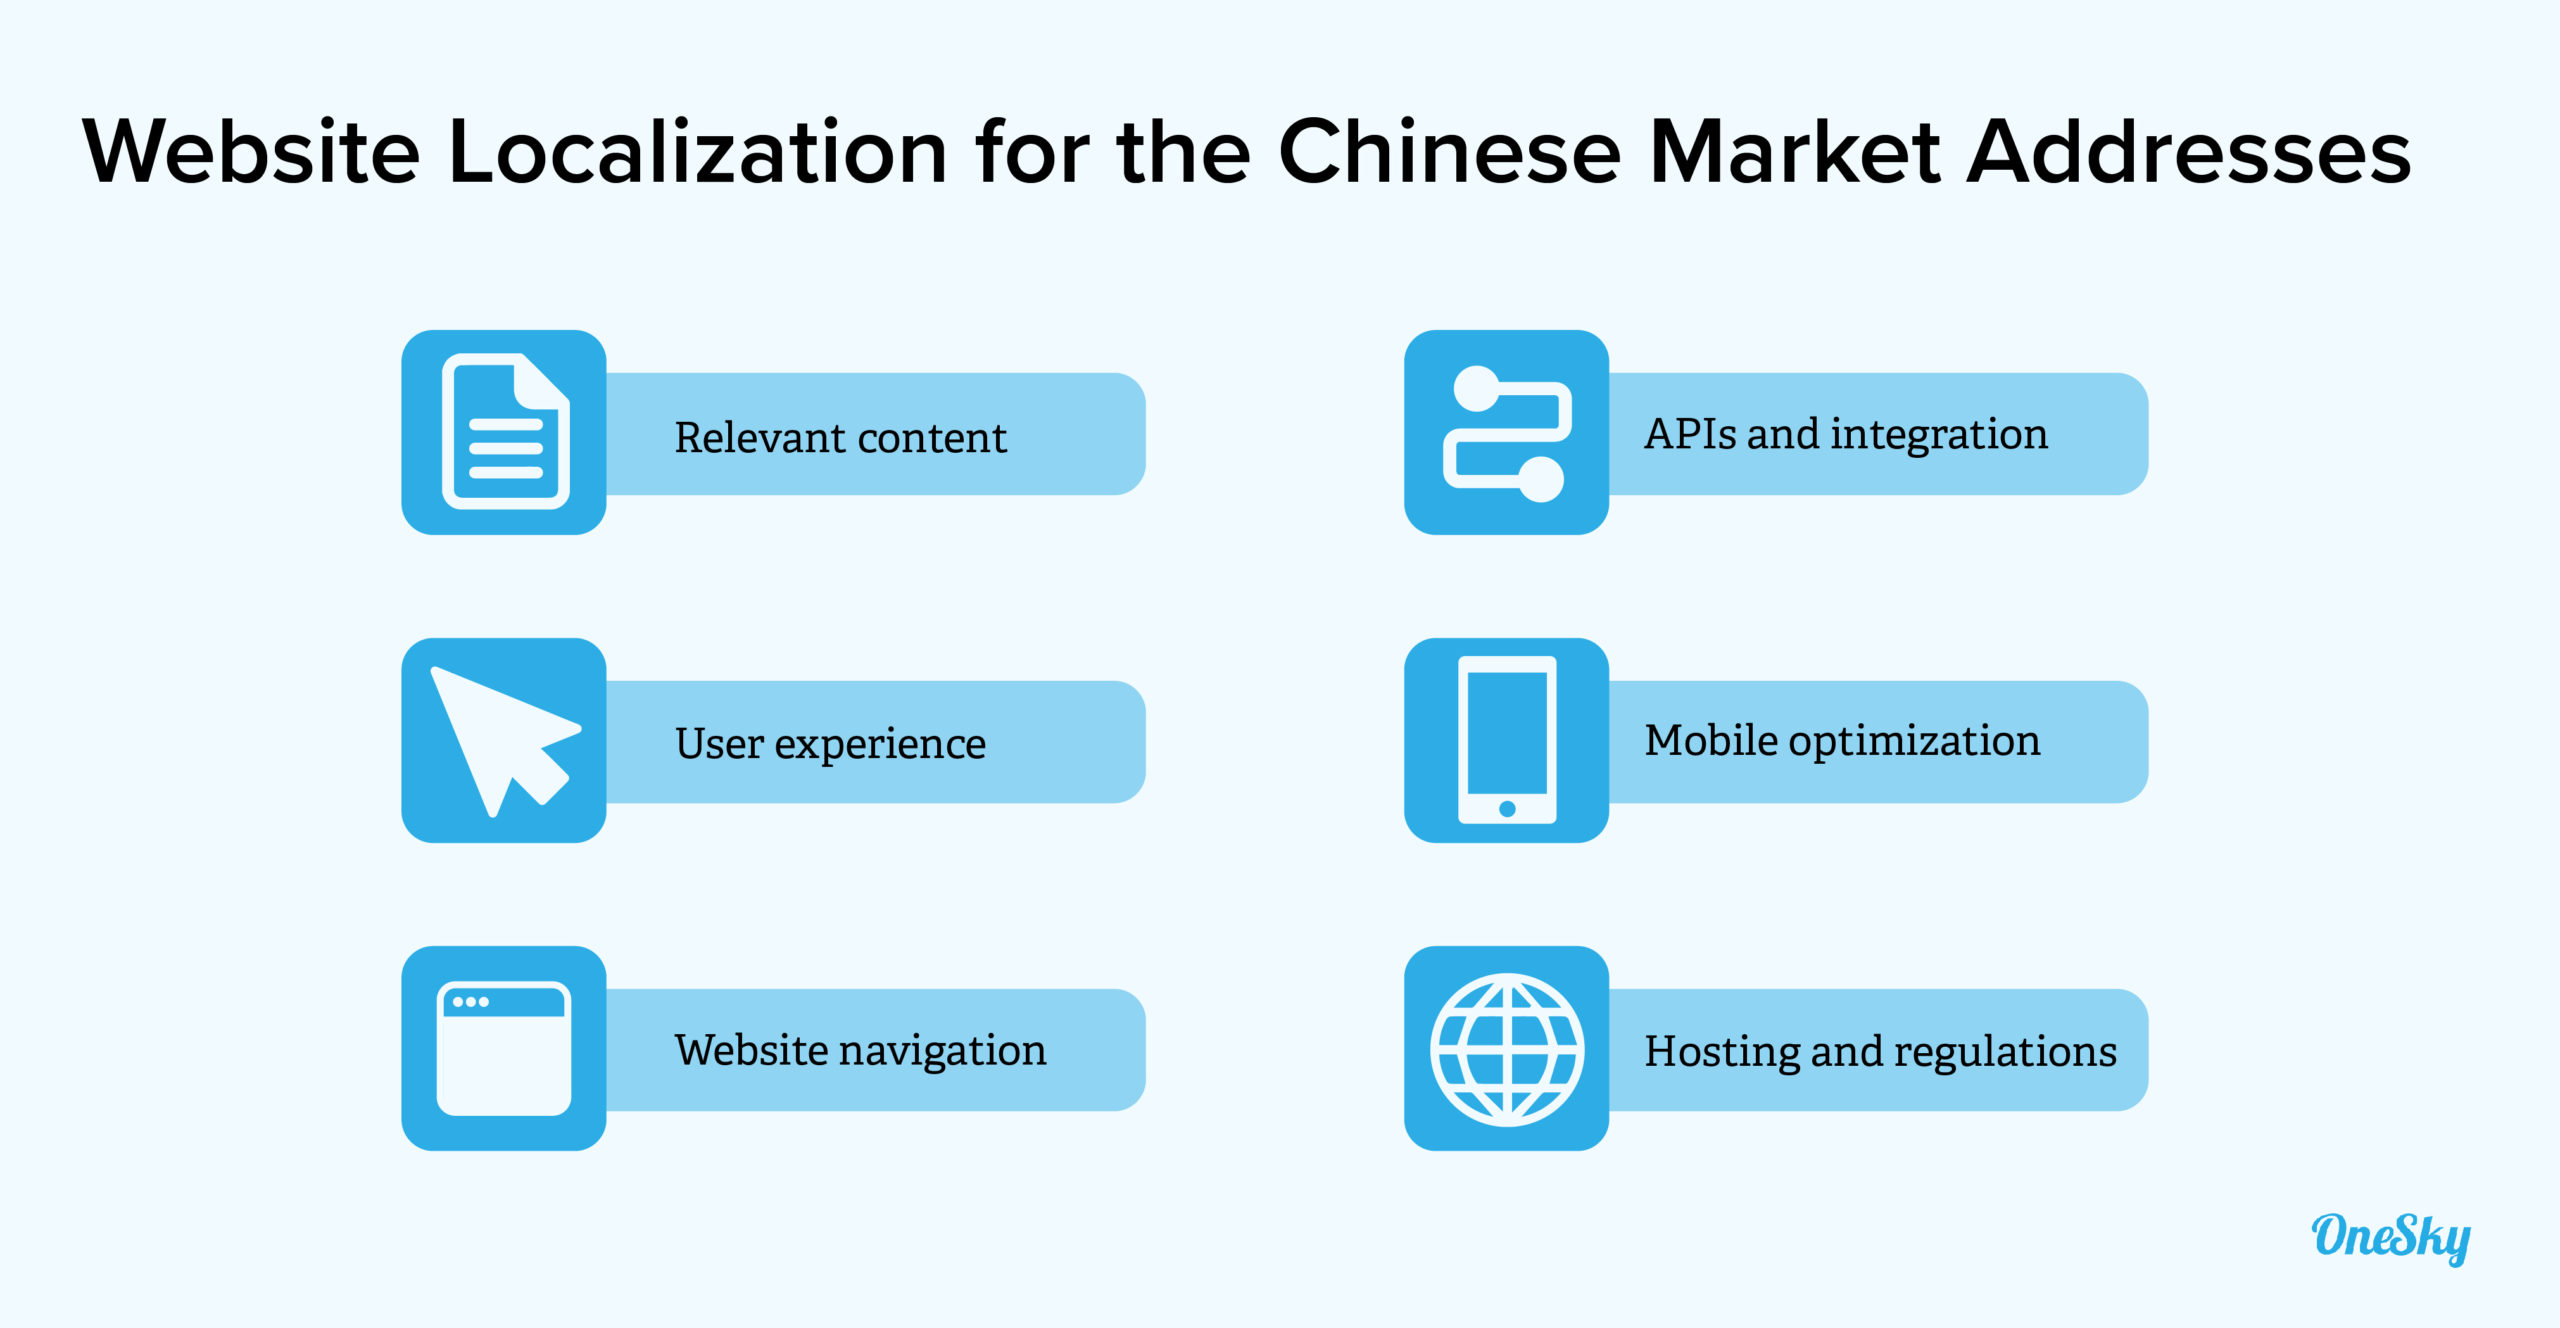 Why You Need Website Localization For the Chinese Market